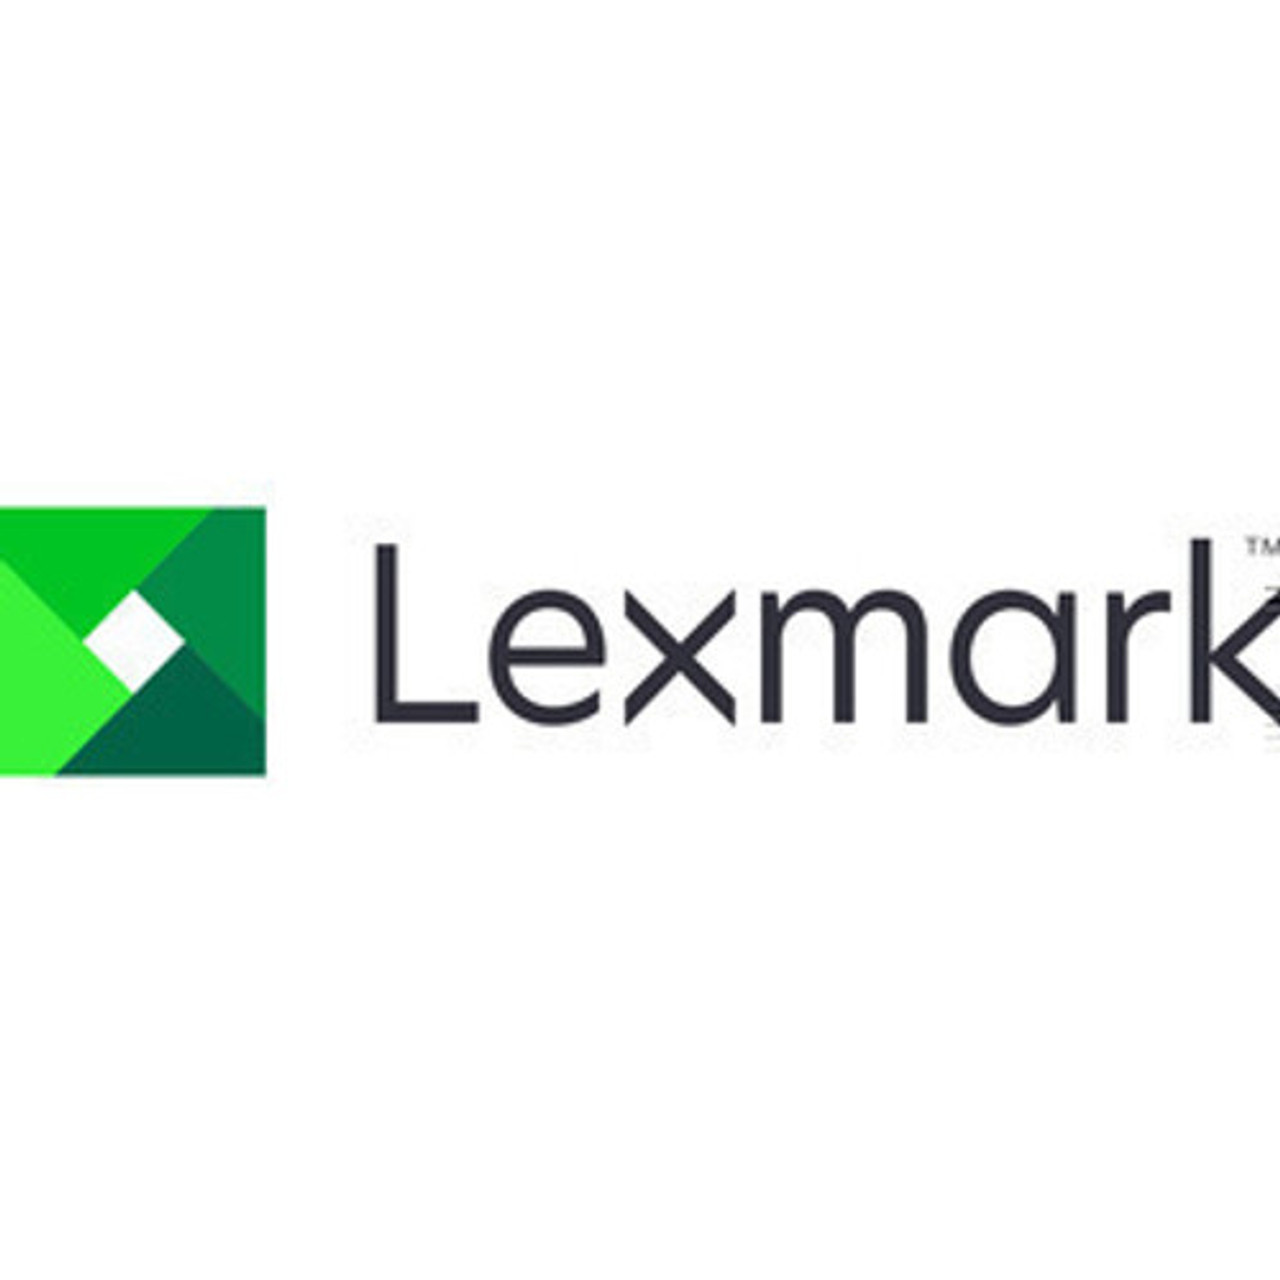 Lexmark DUPLEX REFERENCE EDGE GUIDE - 40X2263